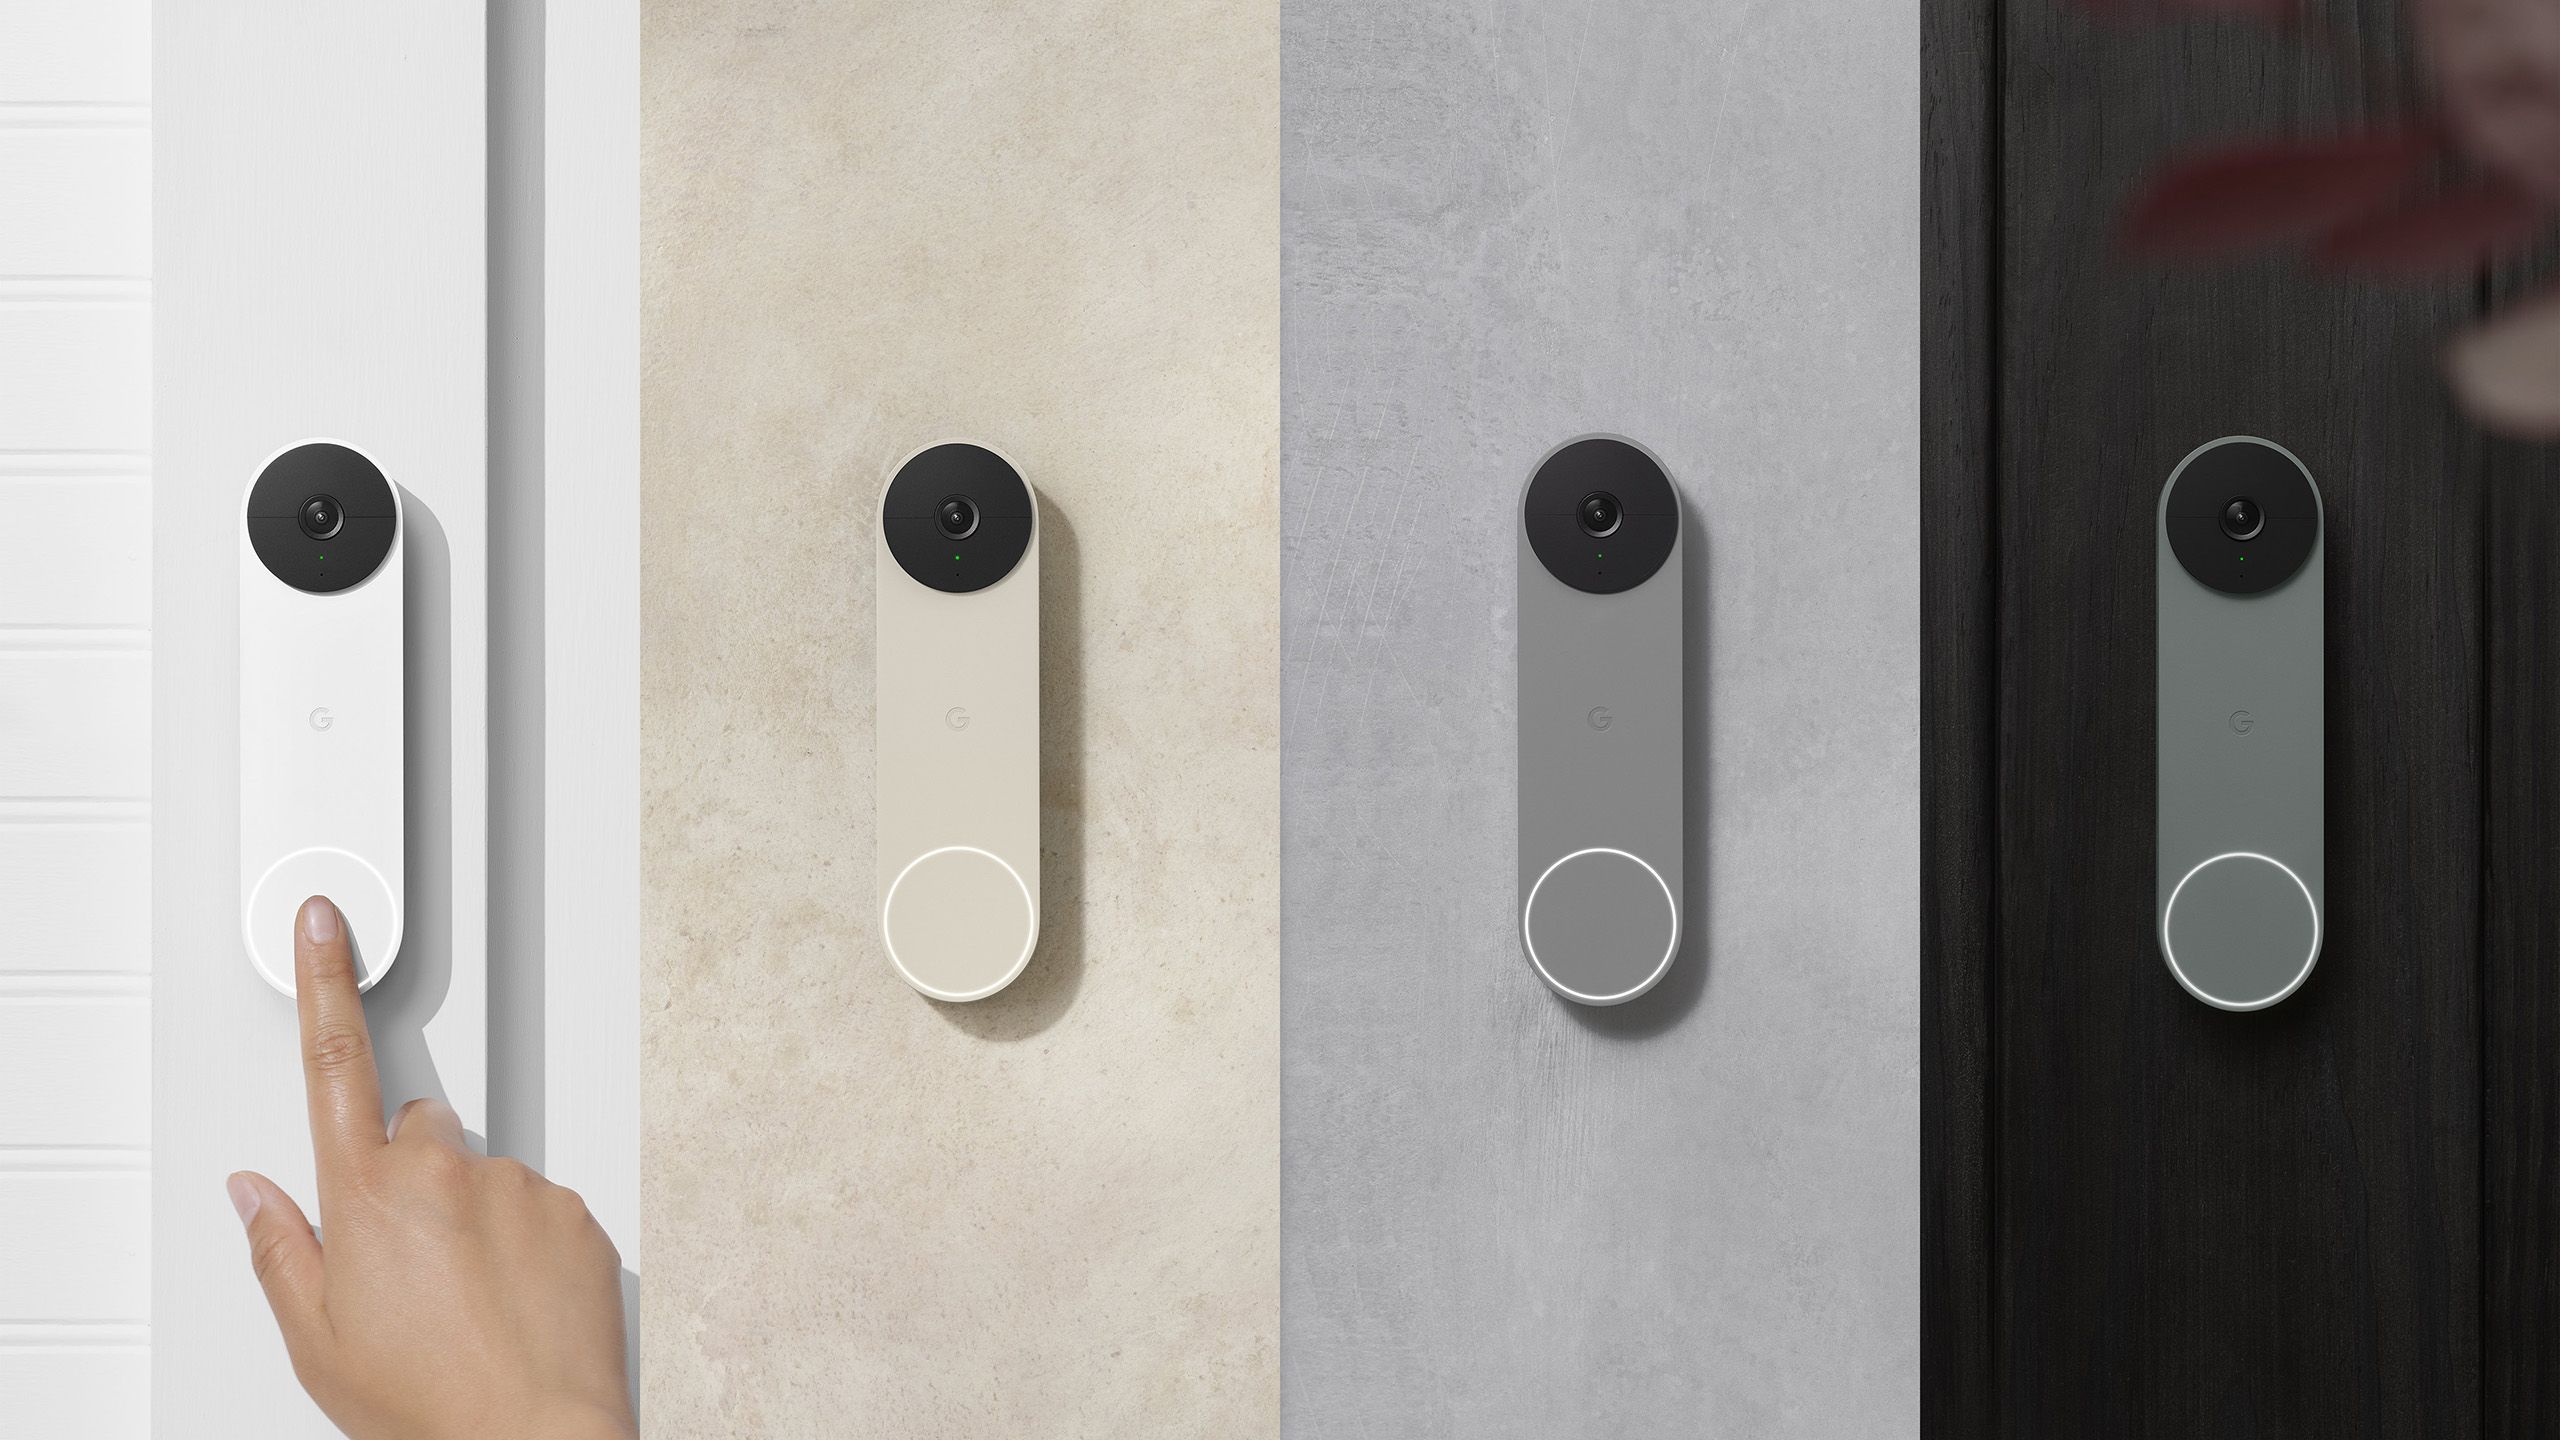 A photo of the Google Nest Doorbell color options